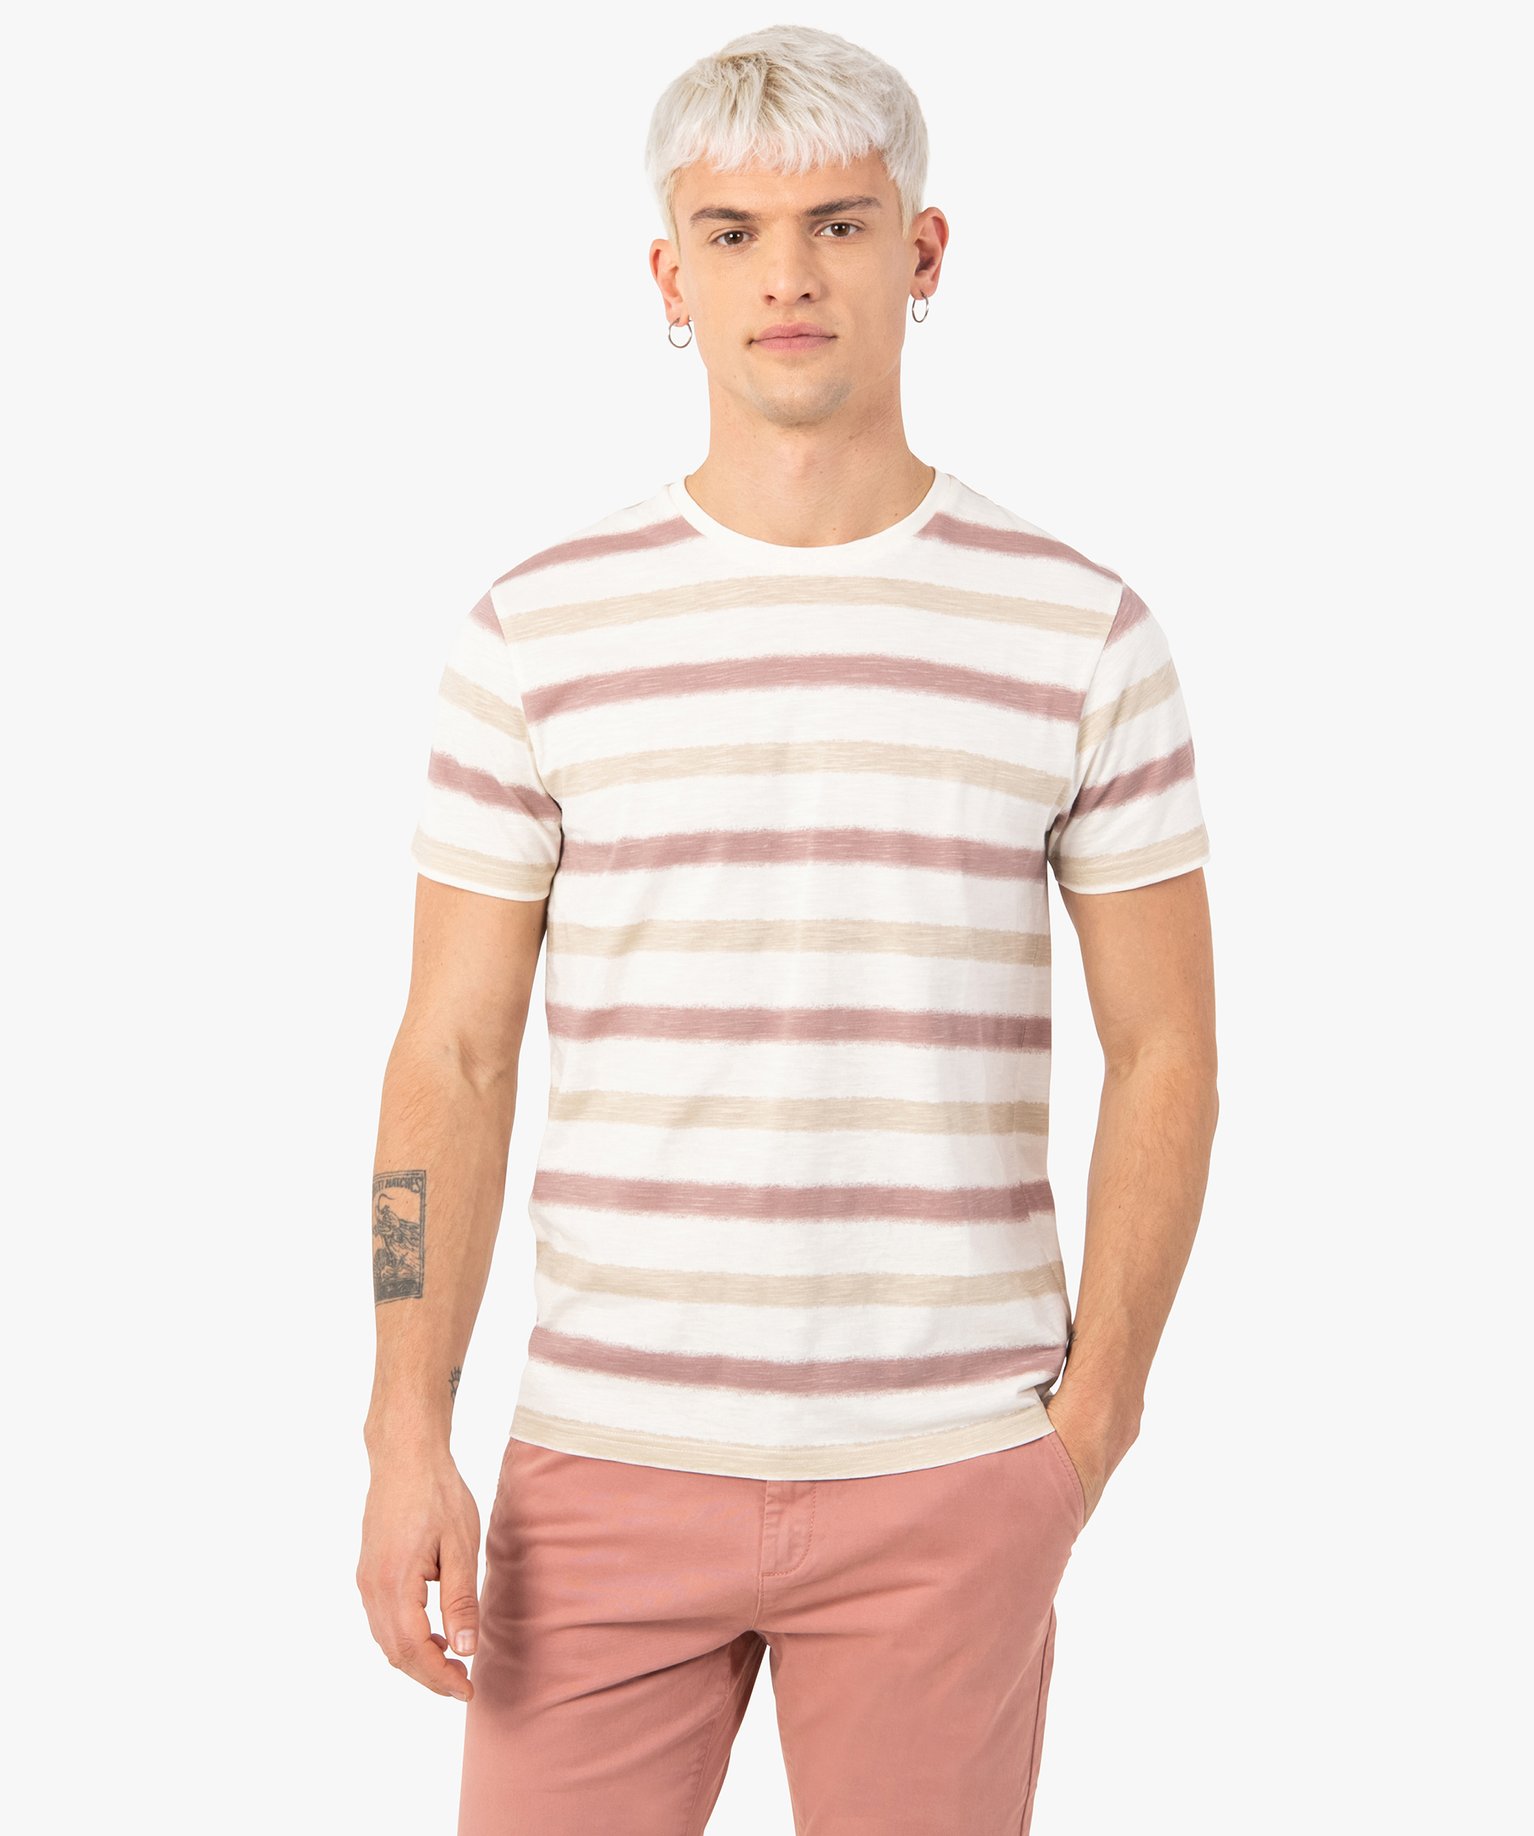 tee-shirt homme raye a manches courtes imprime tee-shirts